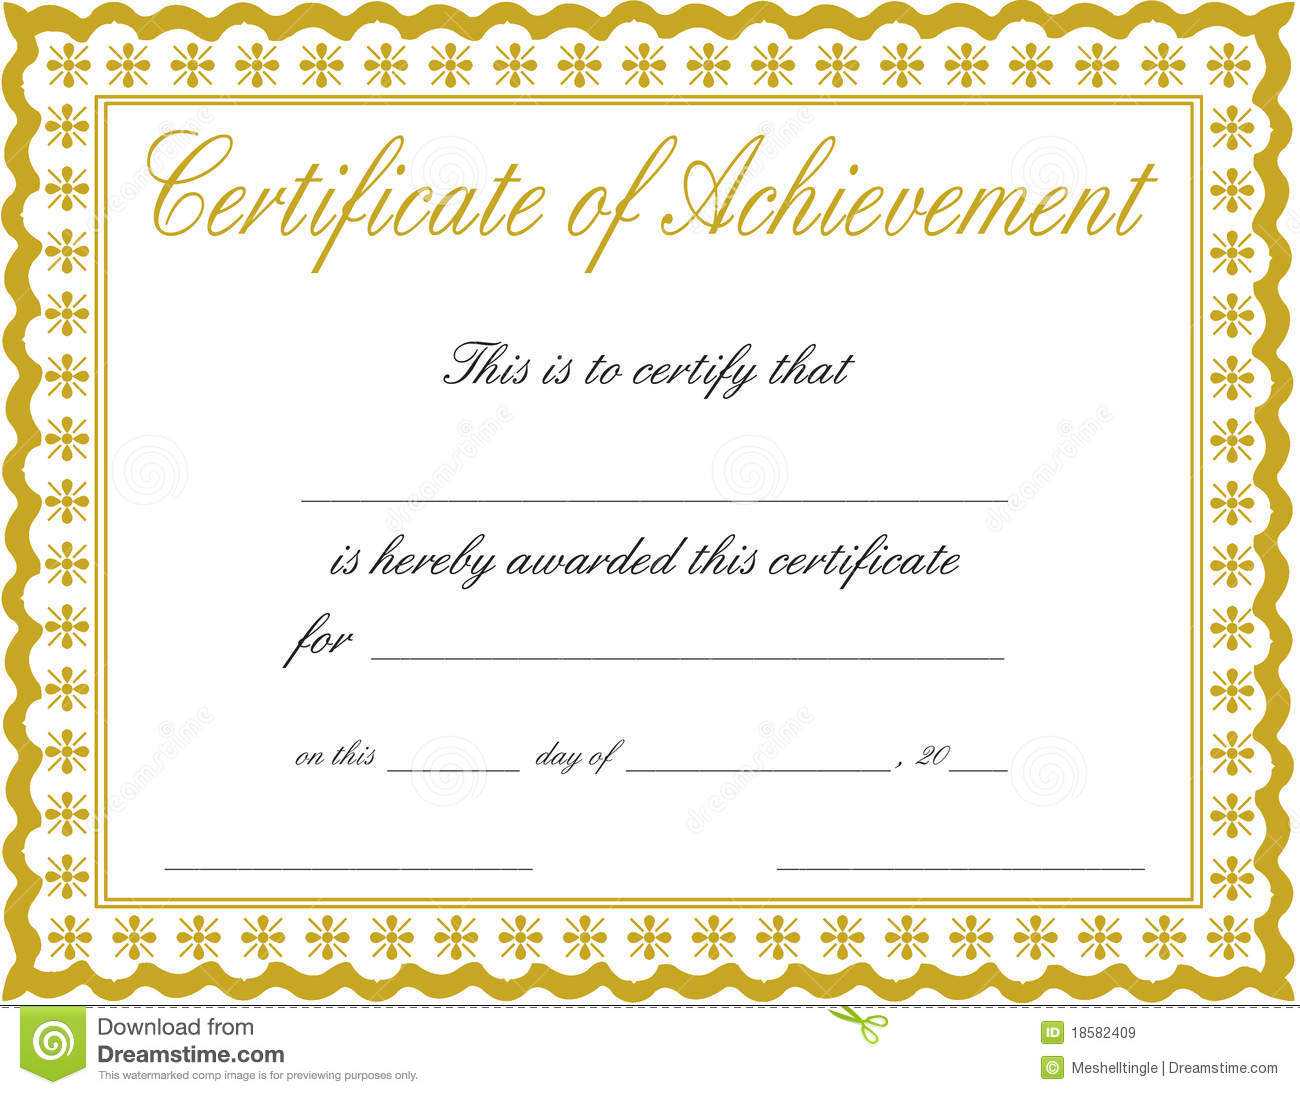 Free Printable Certificate Of Achievement Template | Mult In Certificate Of Achievement Template For Kids